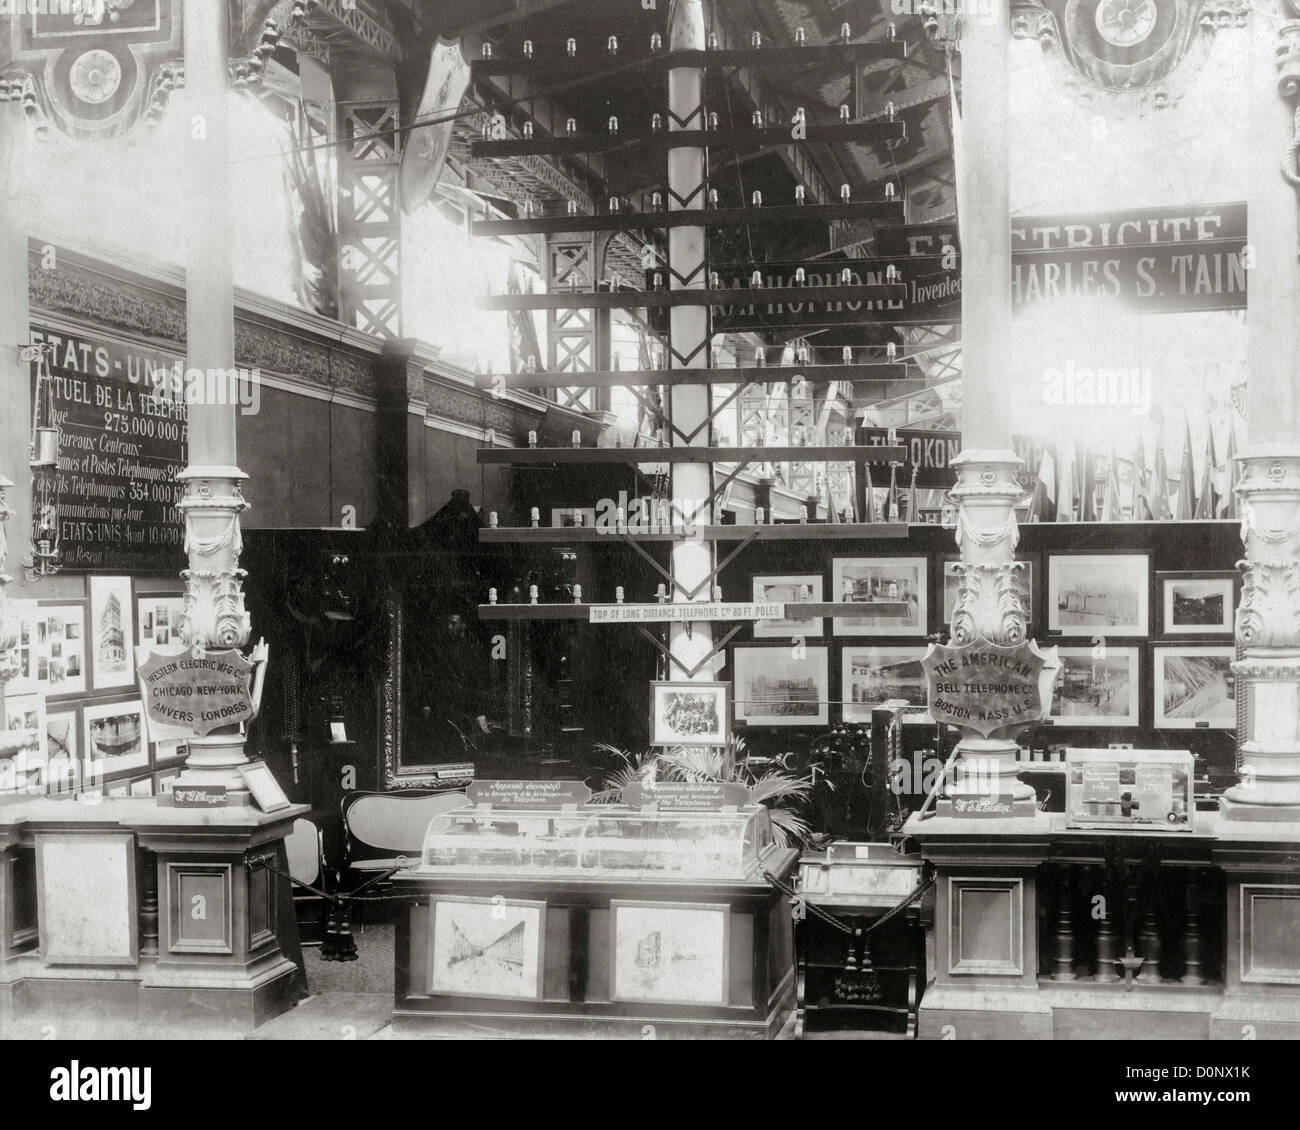 Bell Telephone Exhibit at Paris Exposition of 1889 Stock Photo